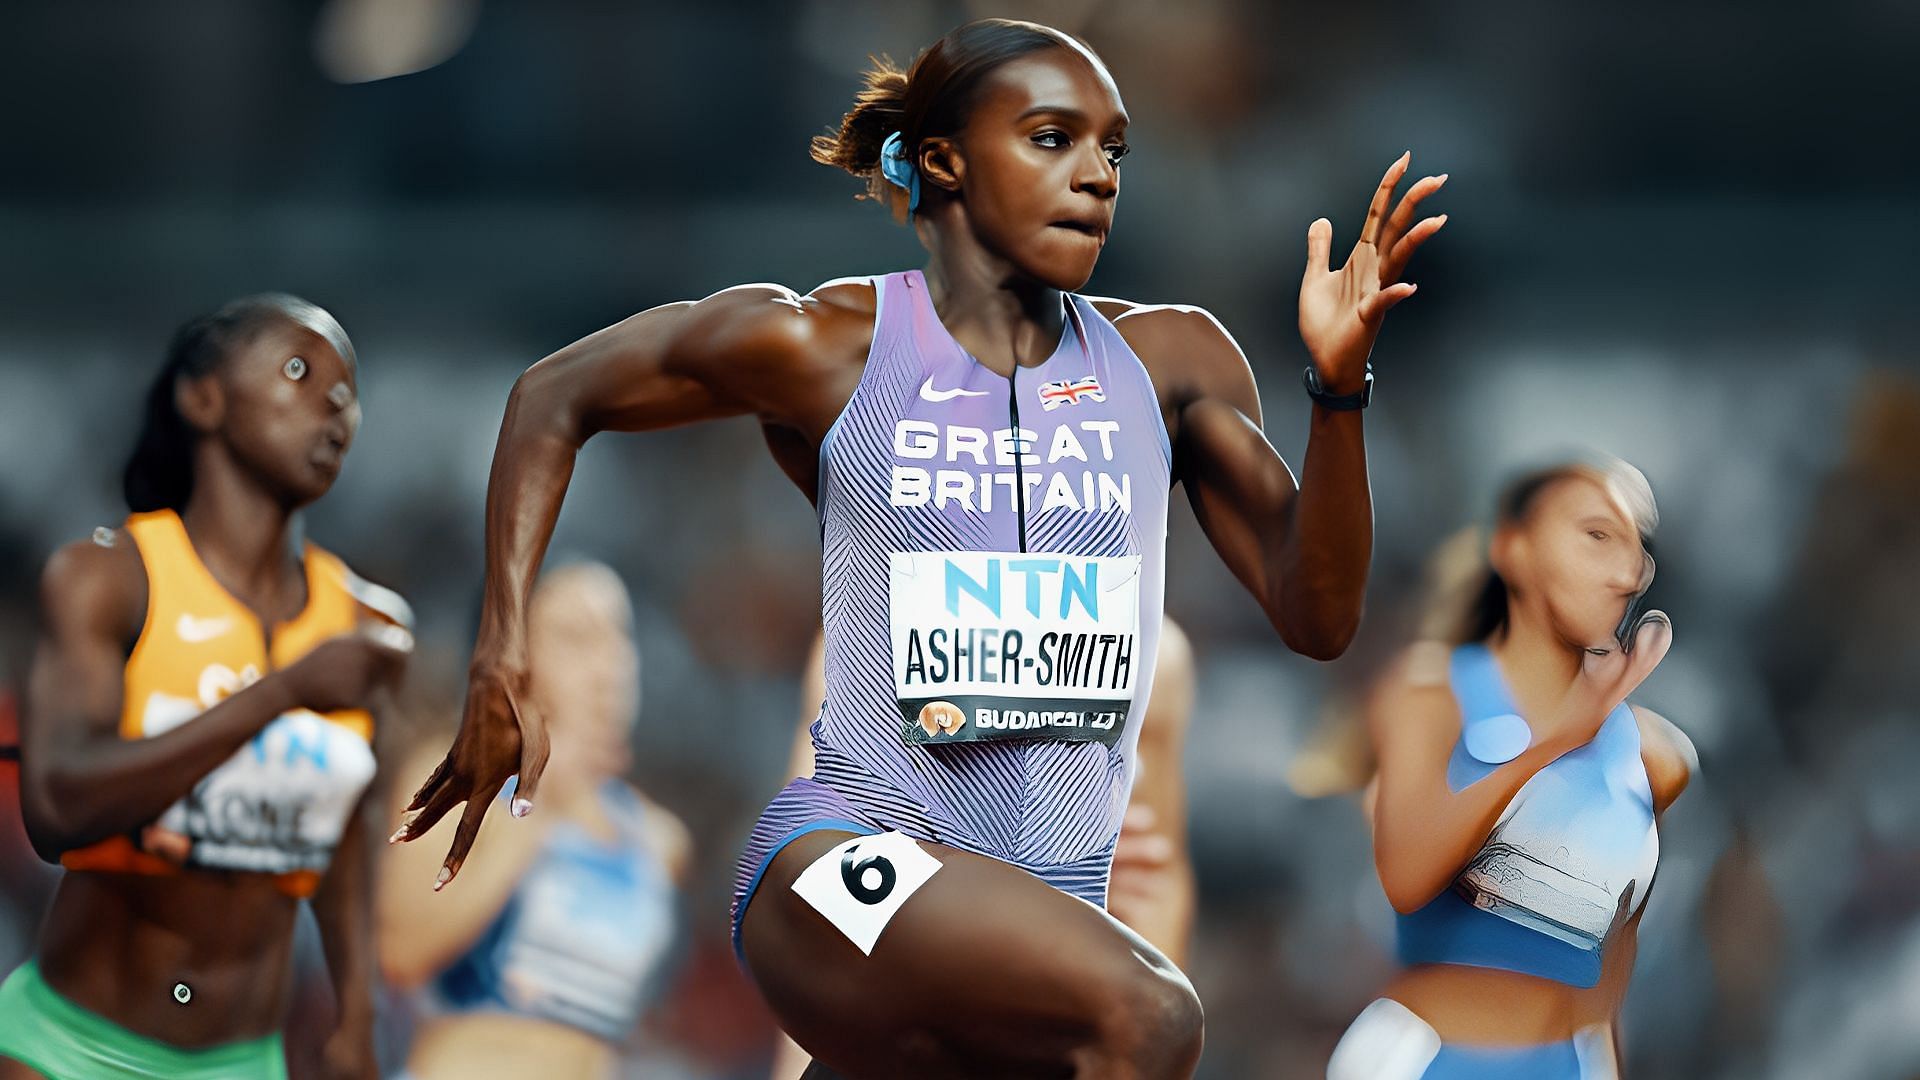 Dina Asher-Smith is the fastest British woman on record.